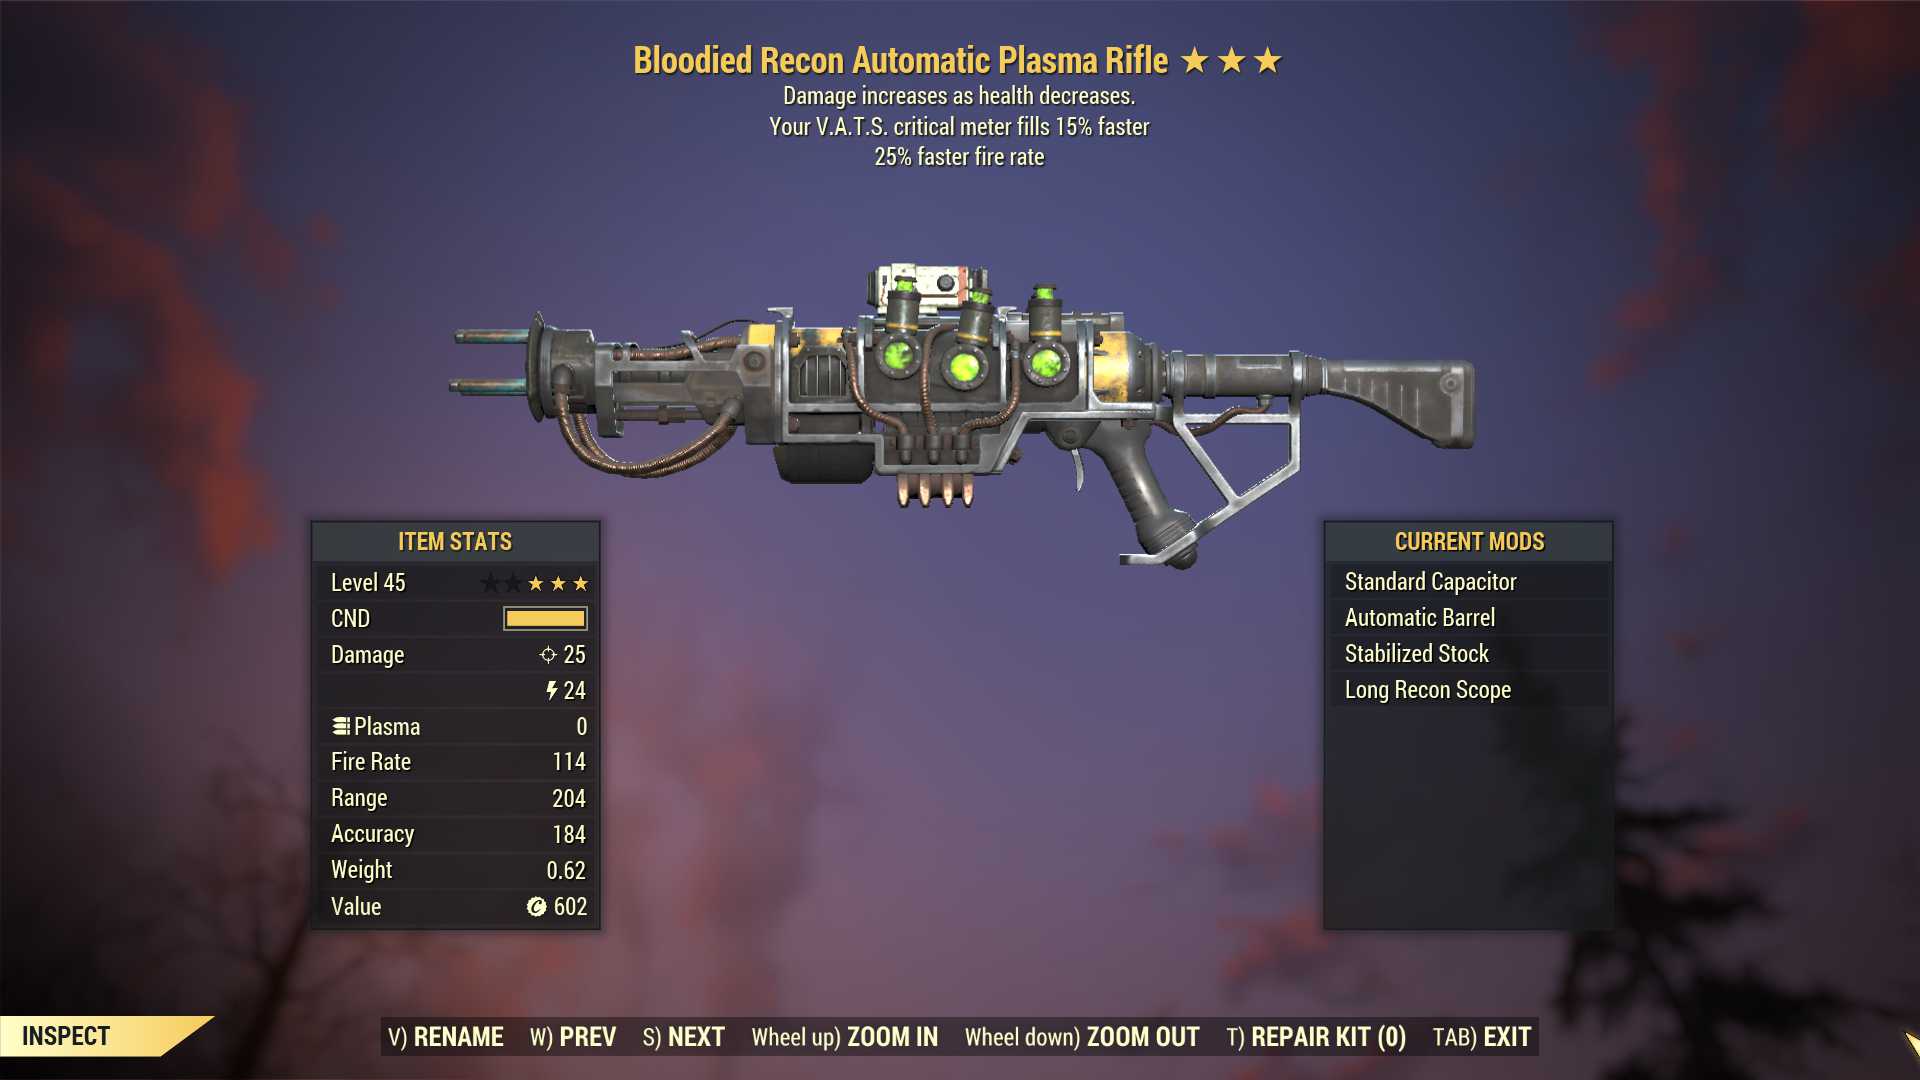 Bloodied Plasma rifle (25% faster fire rate, VATS crit fills 15% faster)